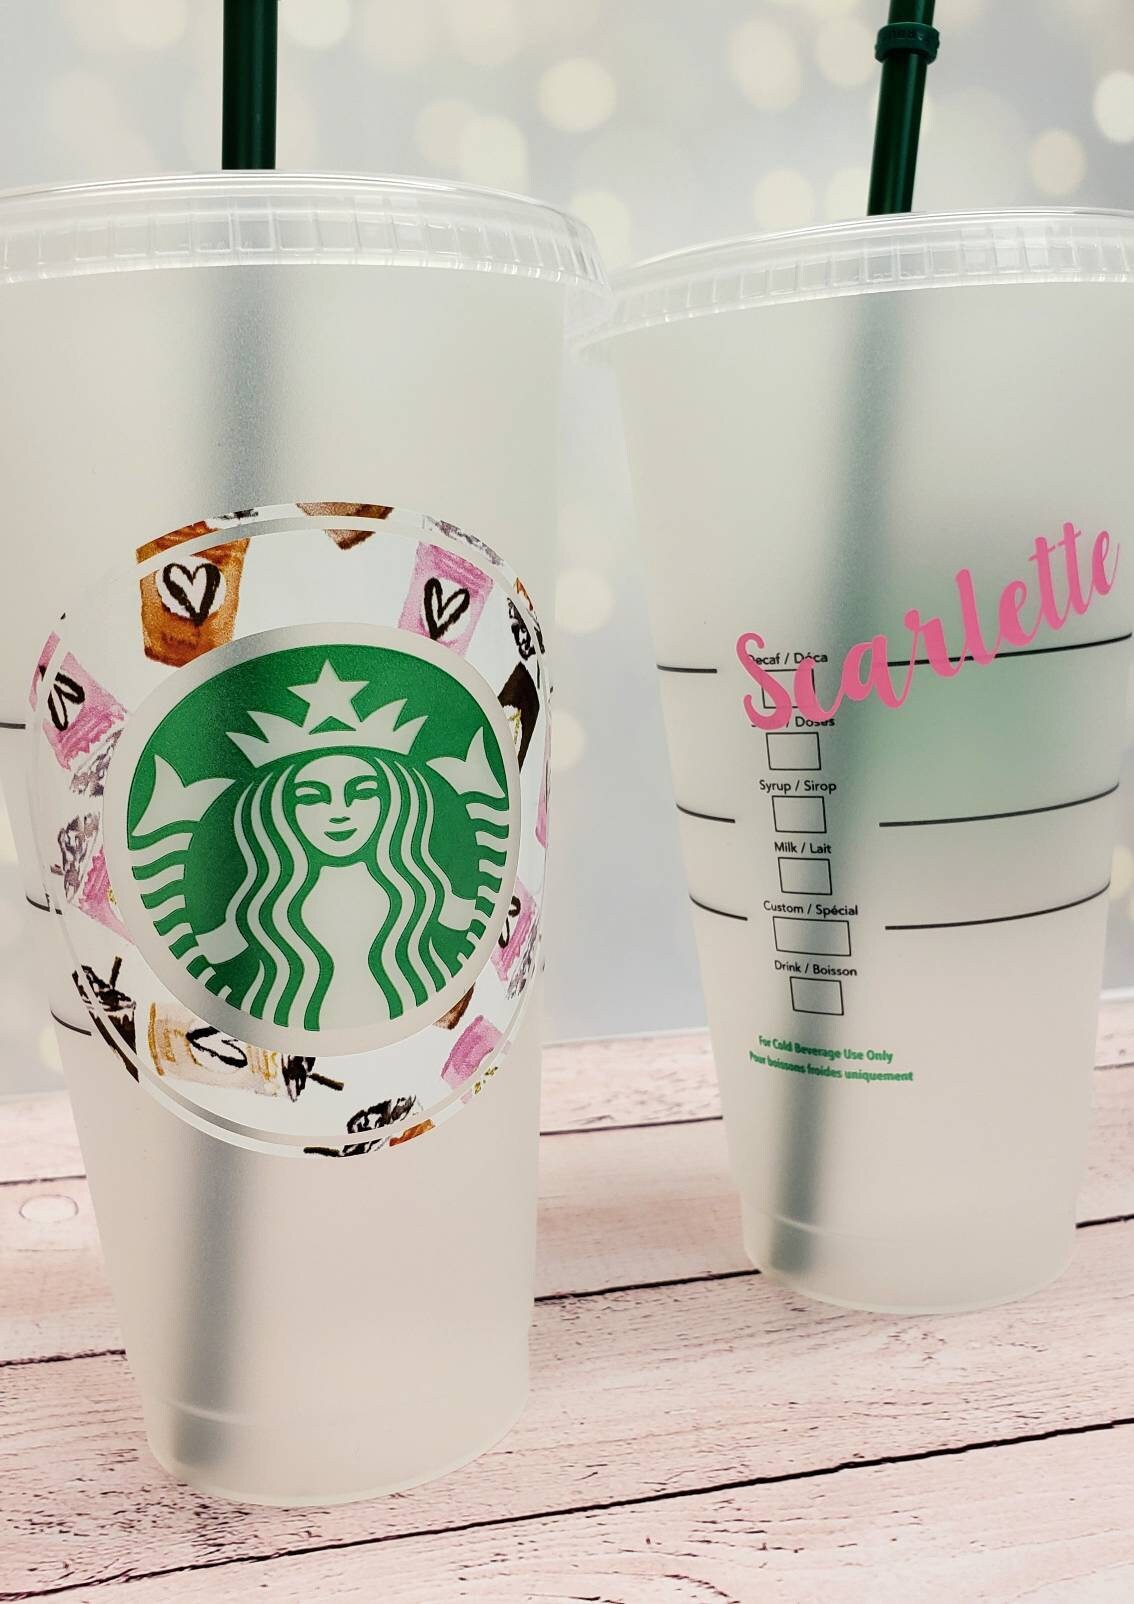 Printed Pattern Decal on Starbucks 24 oz Venti Reusable Cold Cup –  SheltonShirts